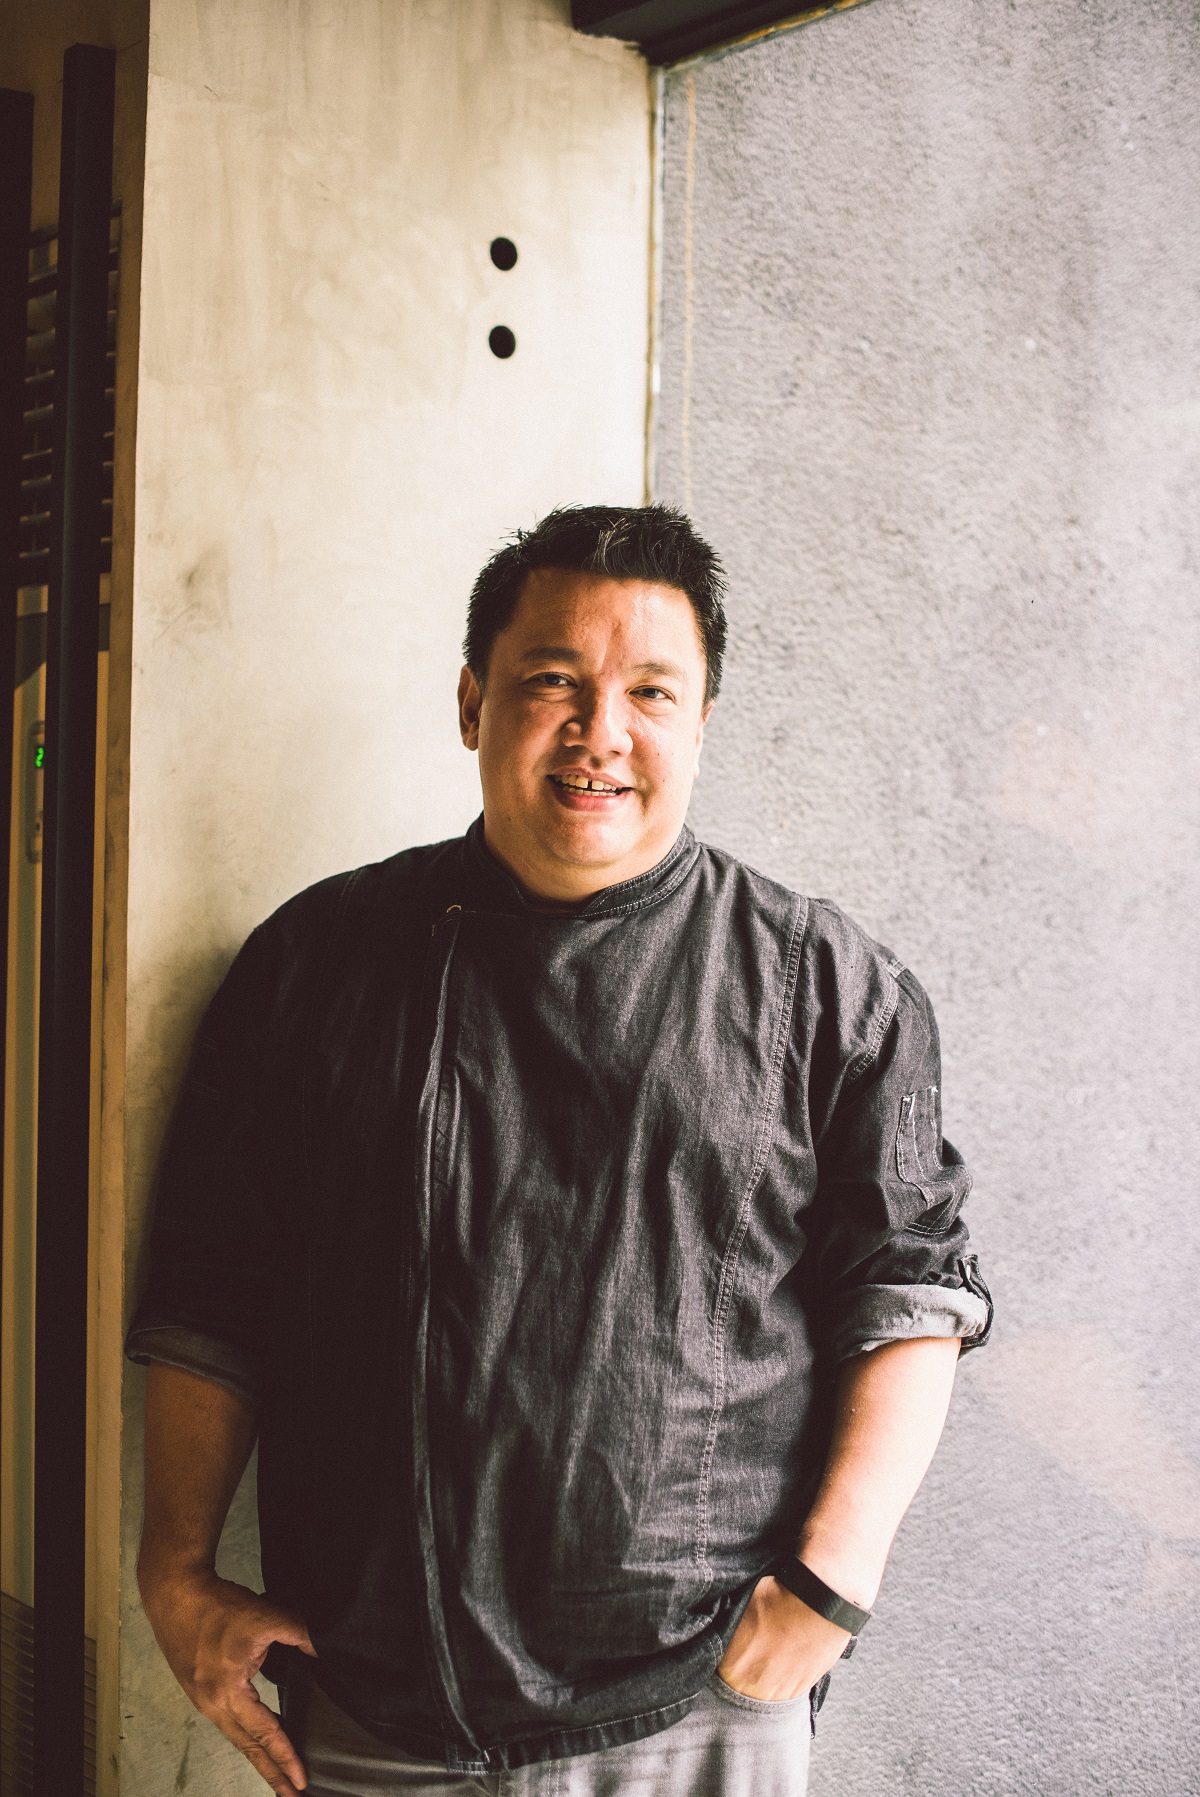 Chef Robby Goco has been serving customers with his own brand of nose-to-tail dishes at Green Pastures